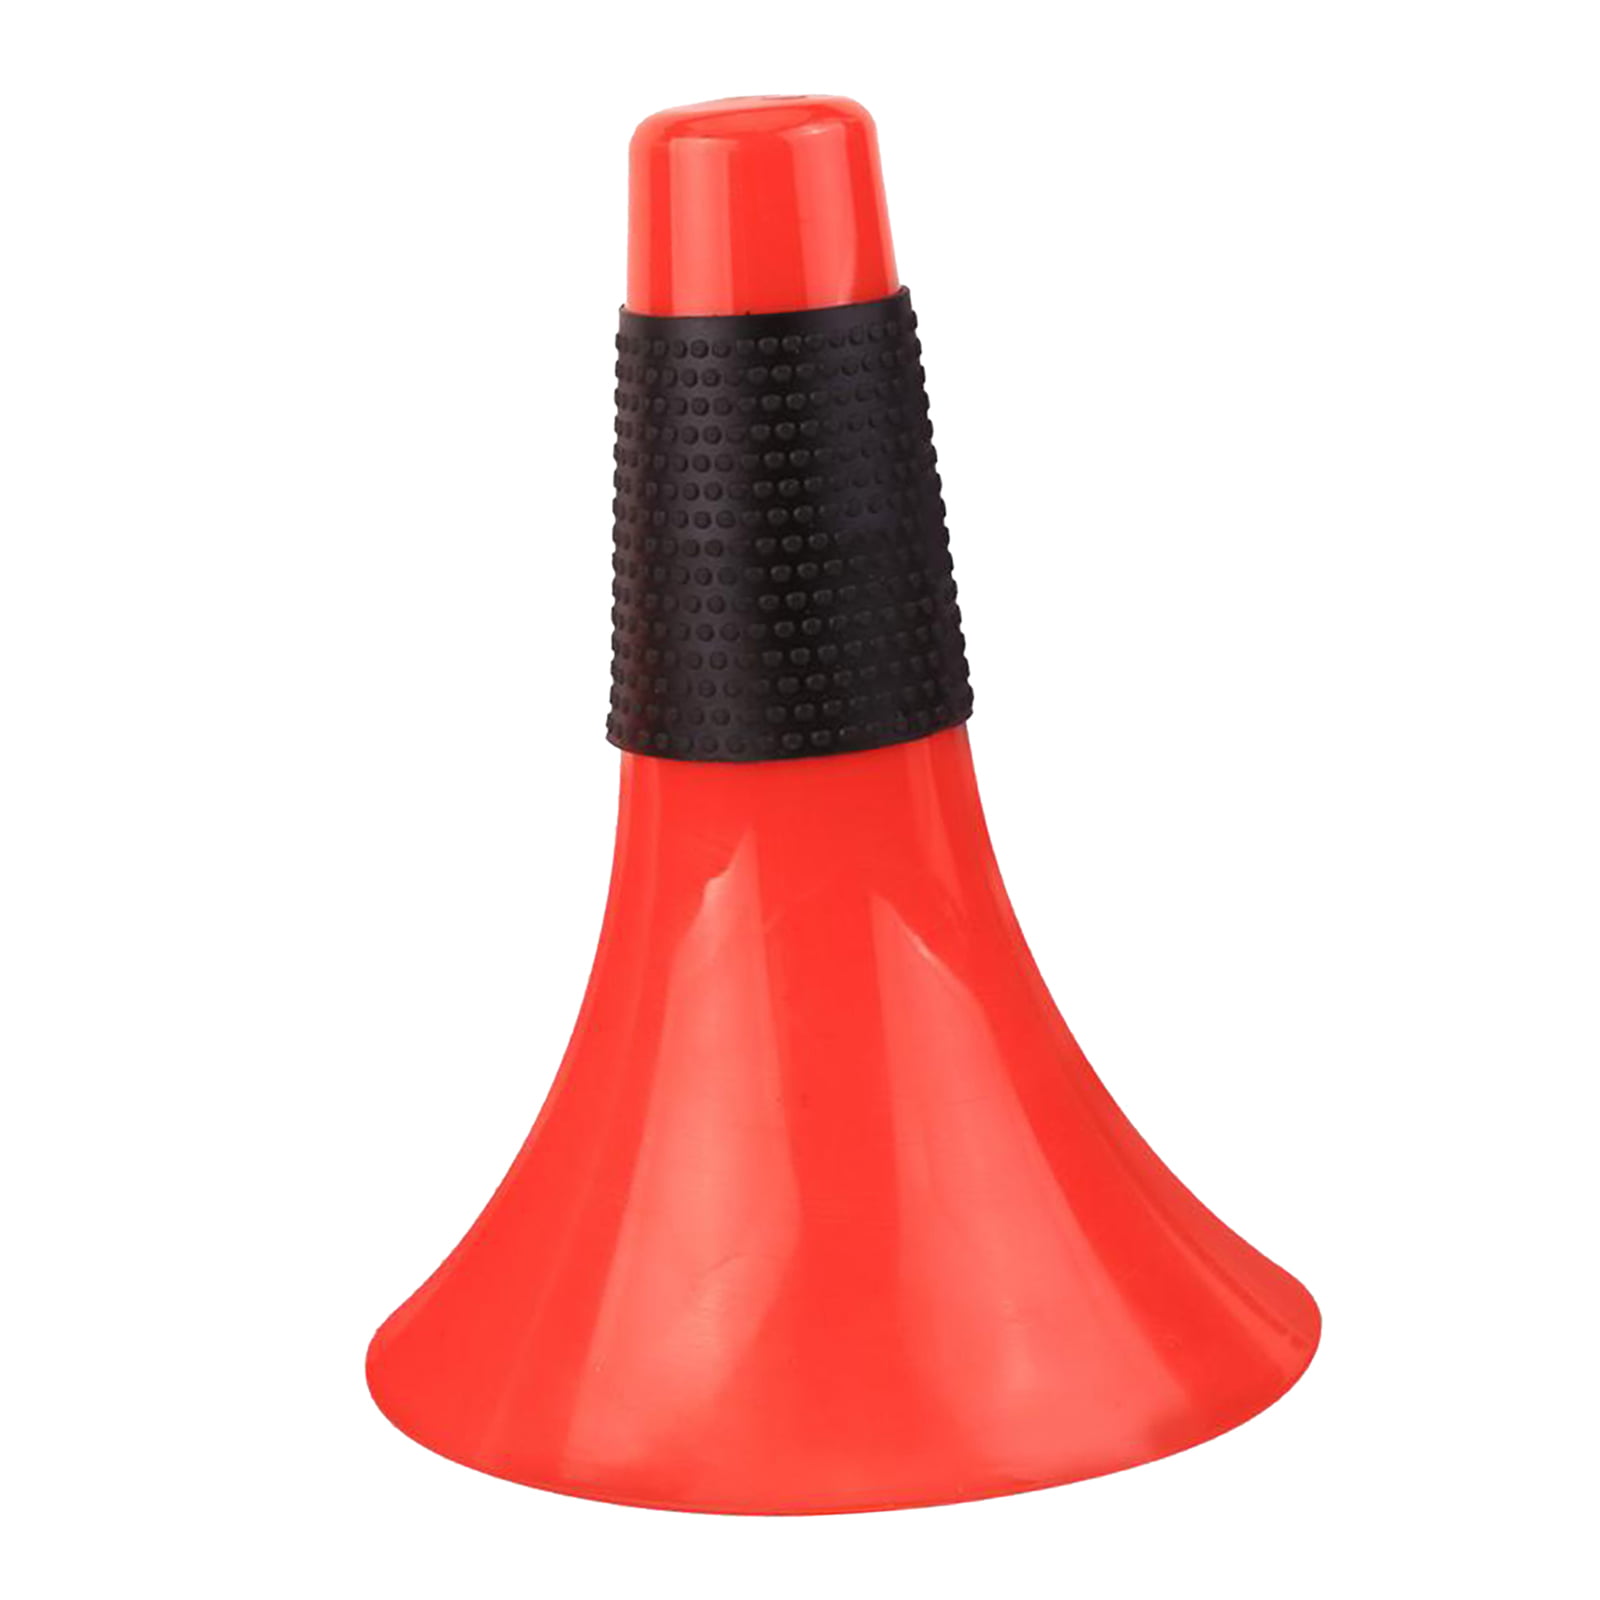 Sport Training Safety Cone for Soccer Football Safety Parking Agility Marker 